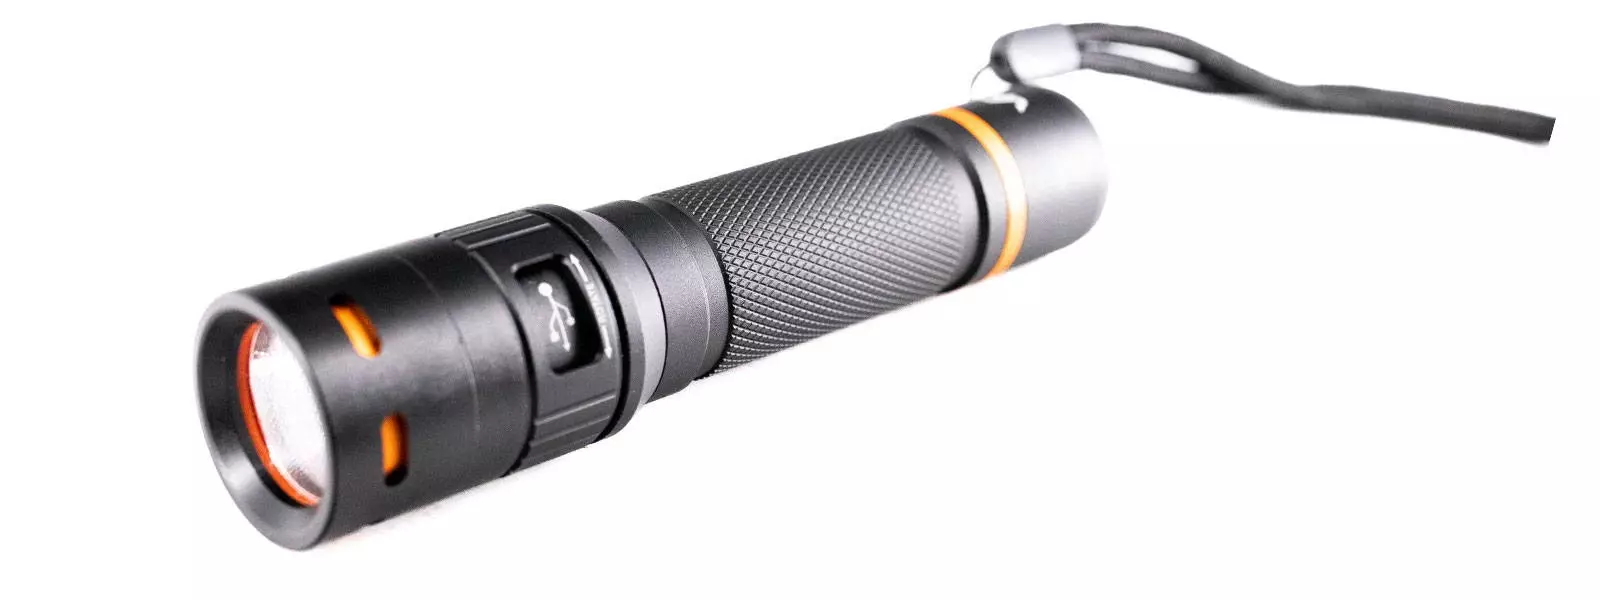 Vaunt Heavy Duty Rechargeable Torch Close up